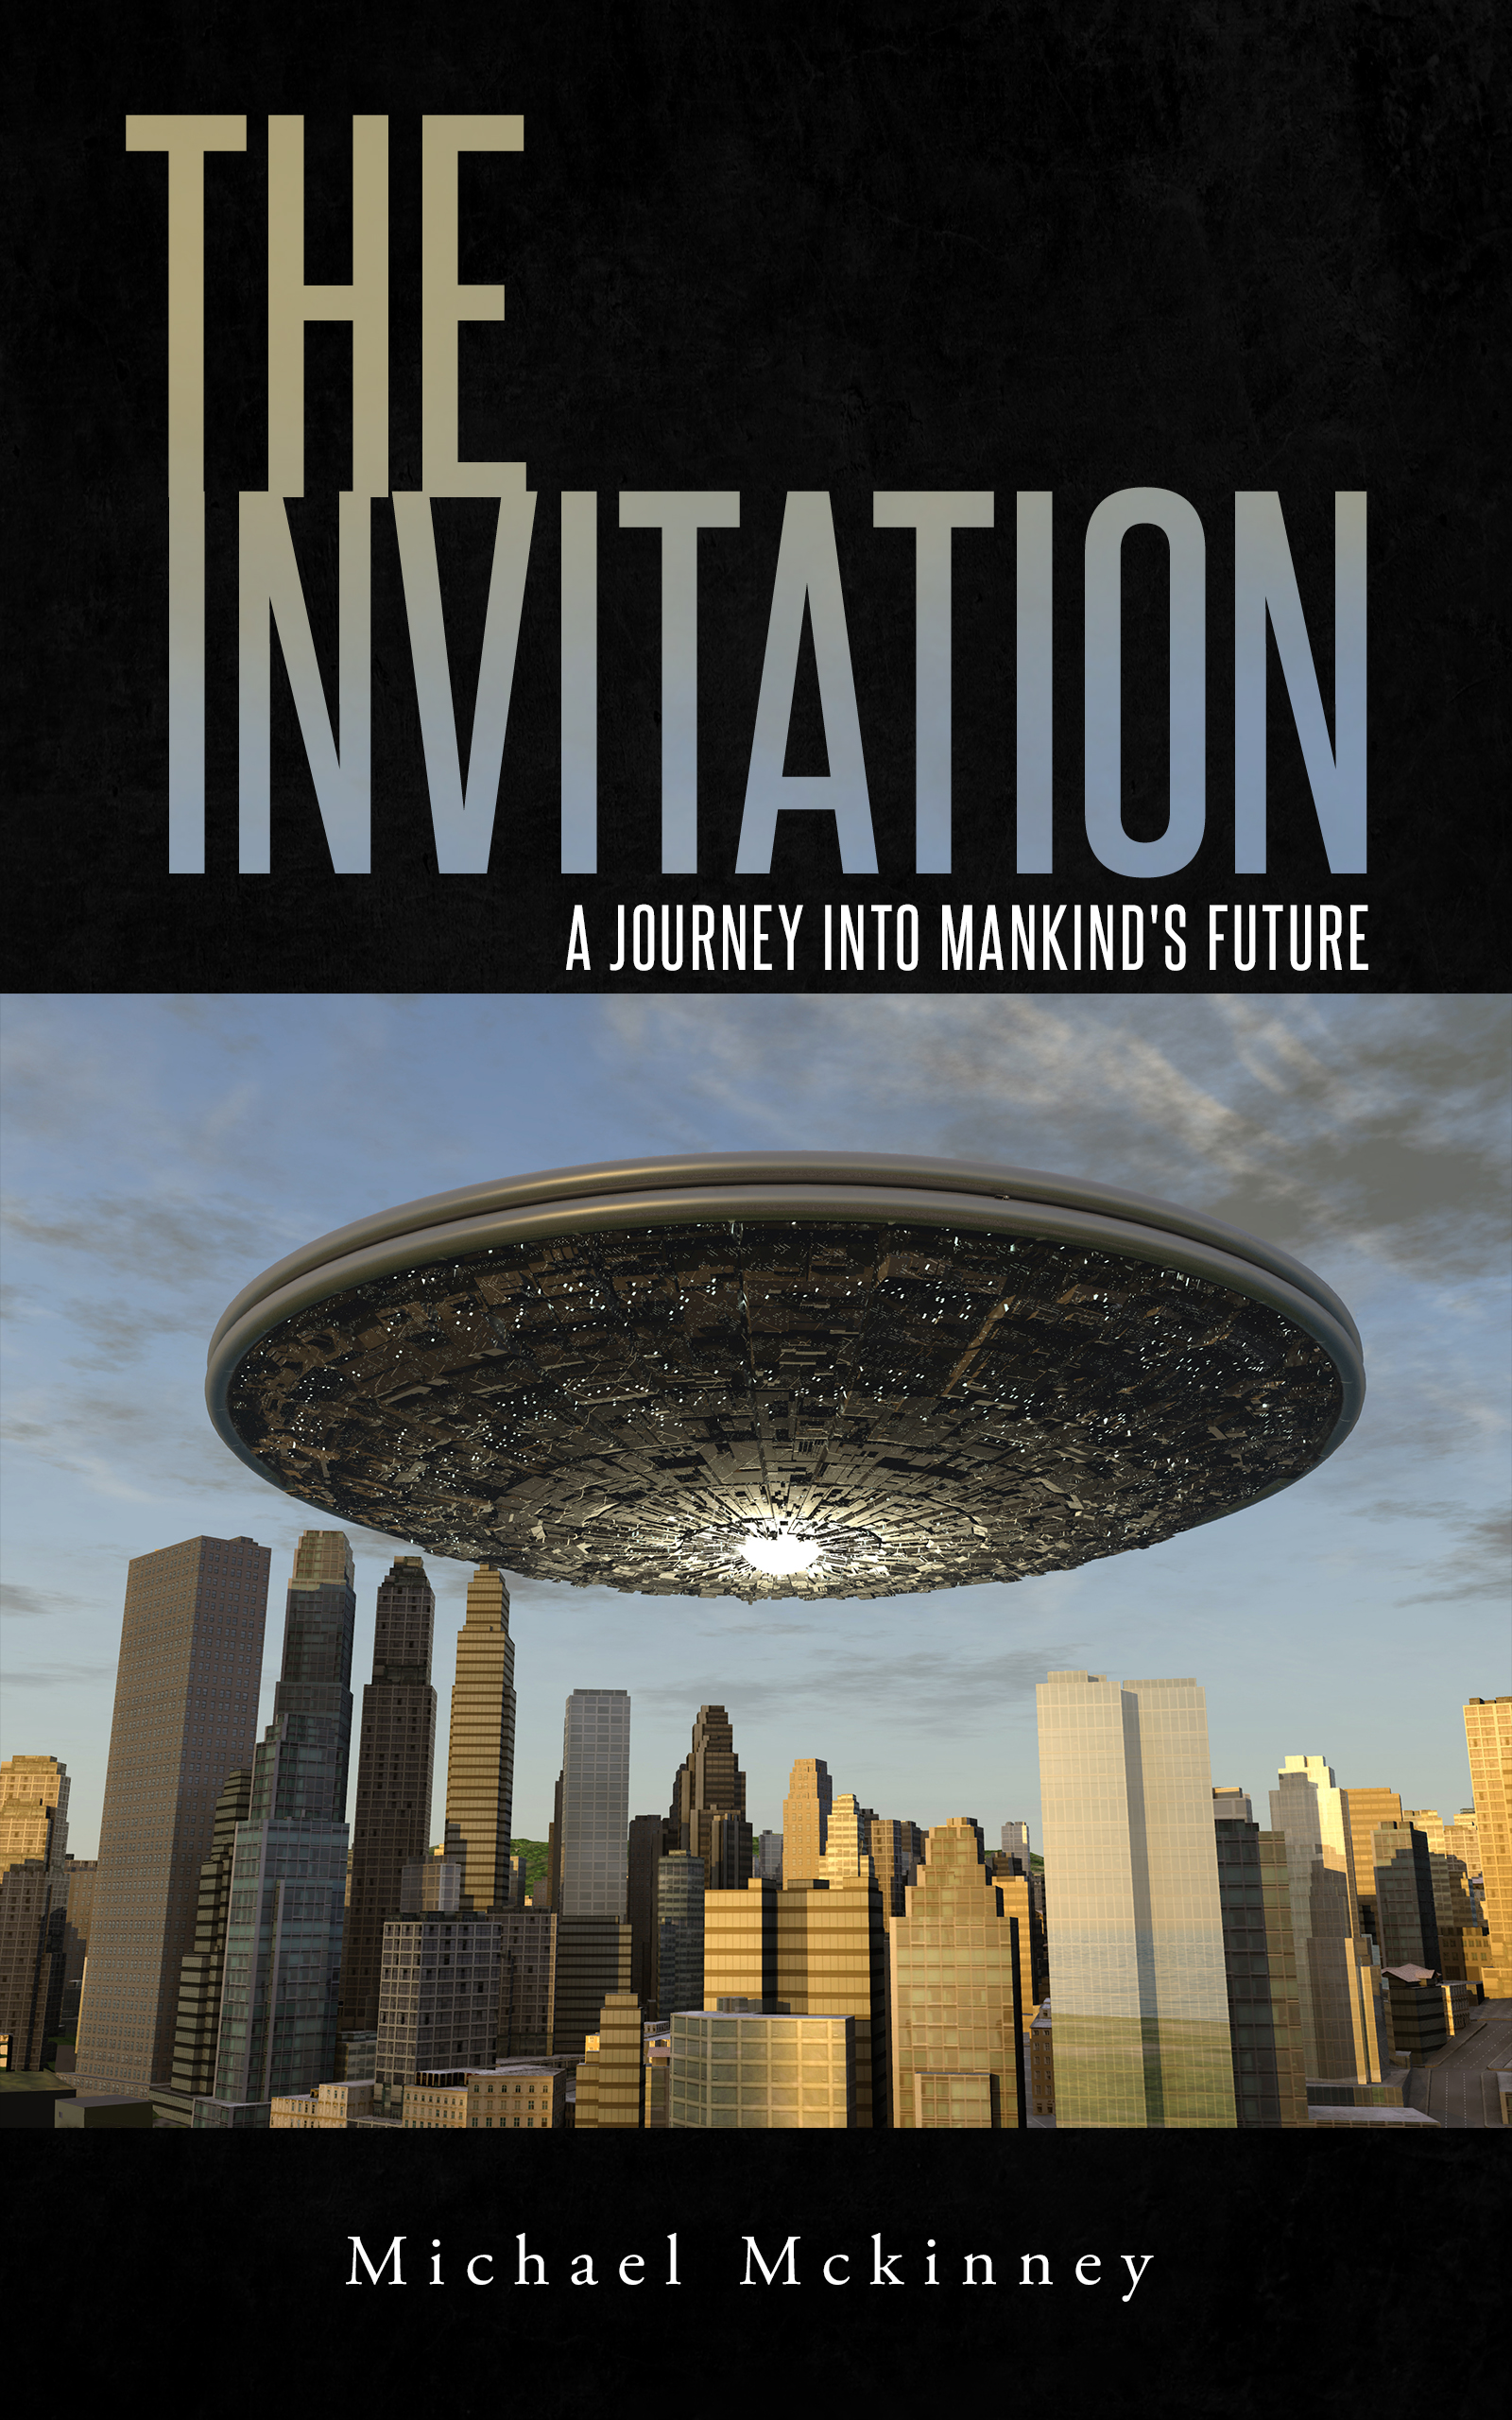 FREE: The Invitation A Journey into Mankind’s Future by Michael Mckinney